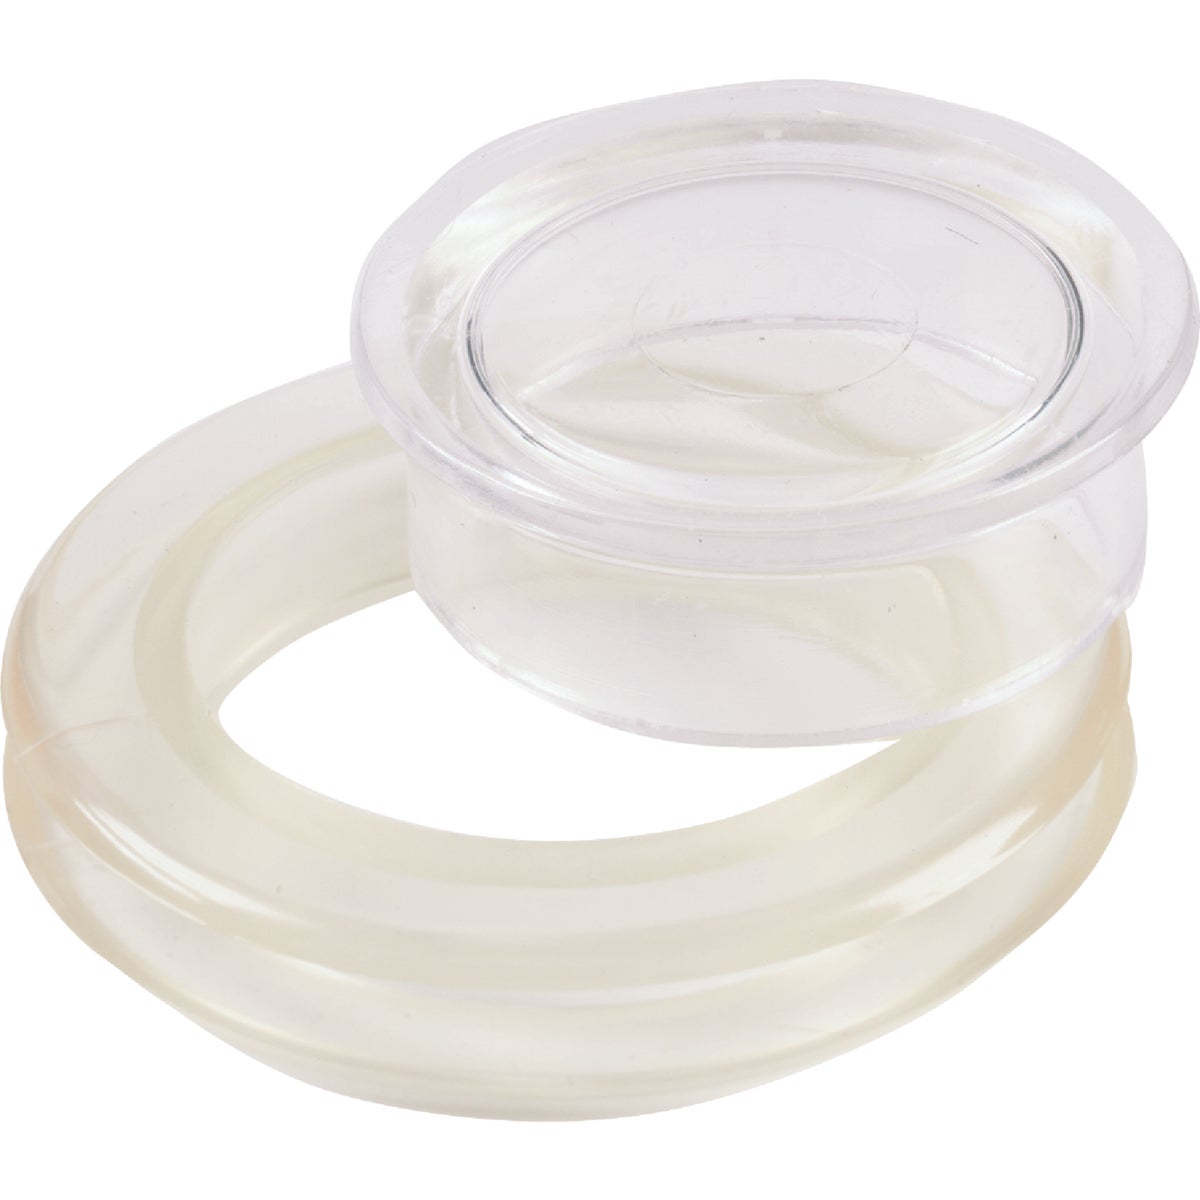 Item 845264, Table umbrella ring hole set includes a vinyl ring that fits in 2" glass 